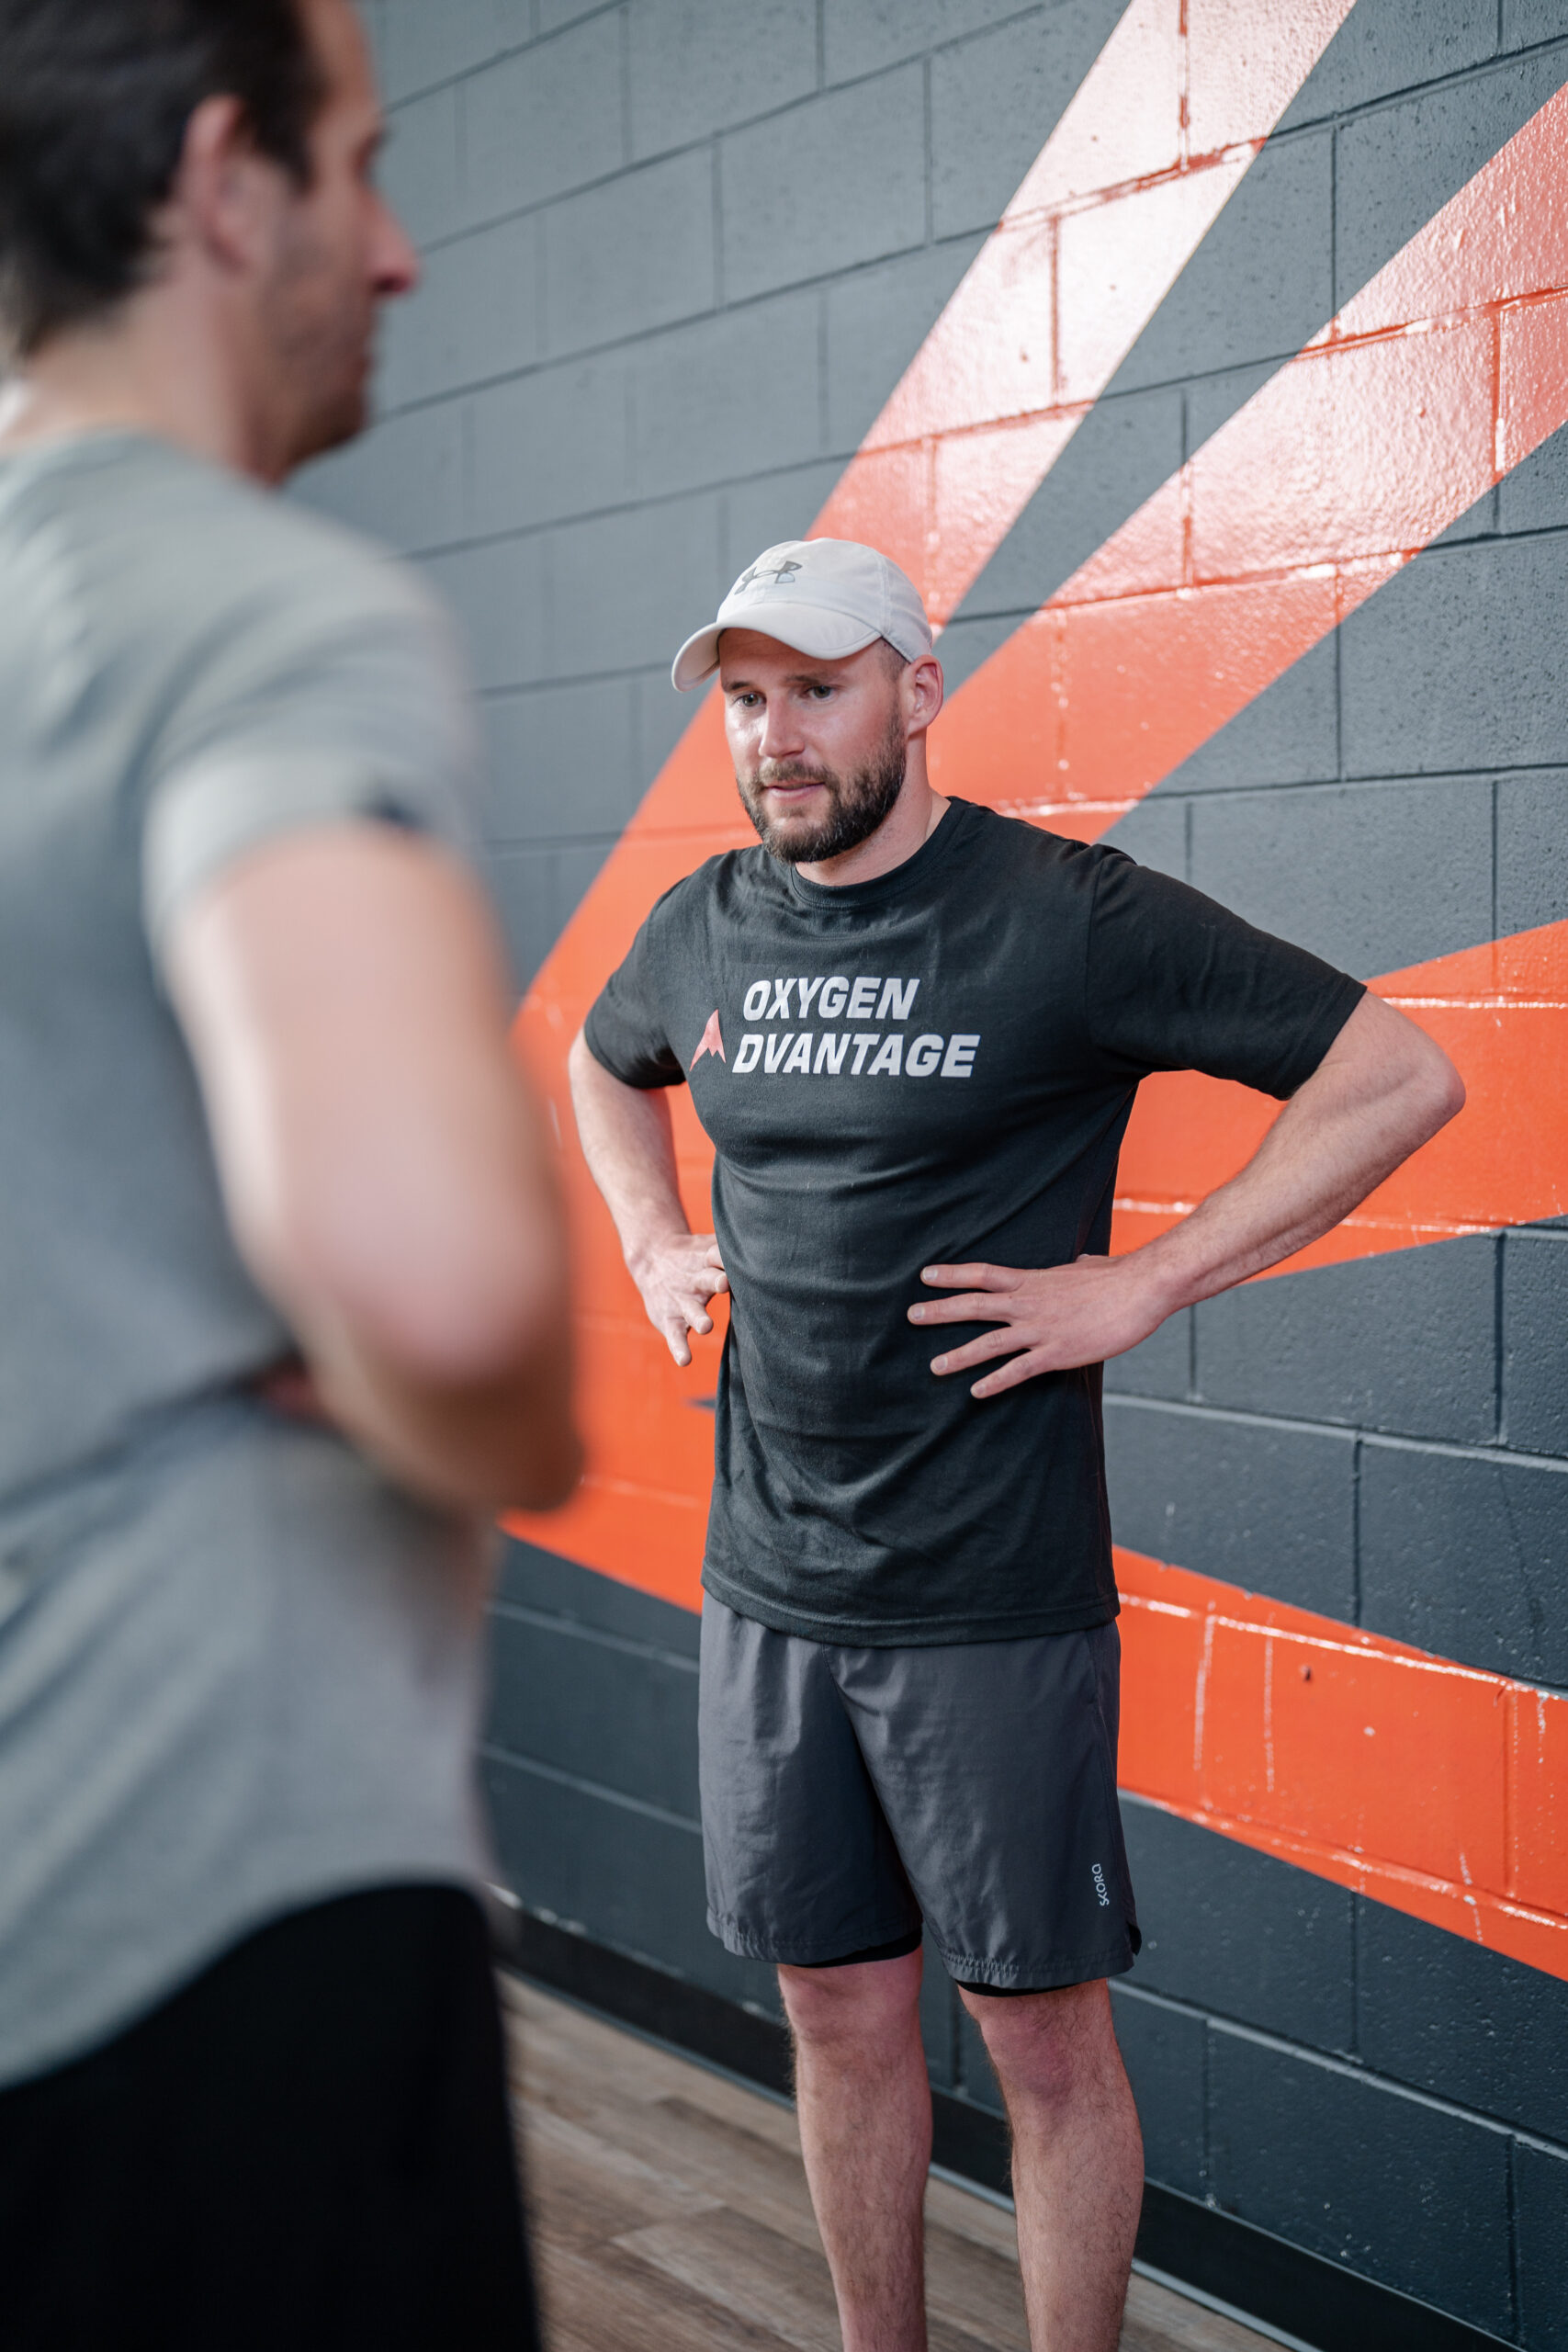 Man wearing a black shirt that says Oxygen Advantage on it has his hands on ribs and coaching someone on a breathwork exercise at a gym.